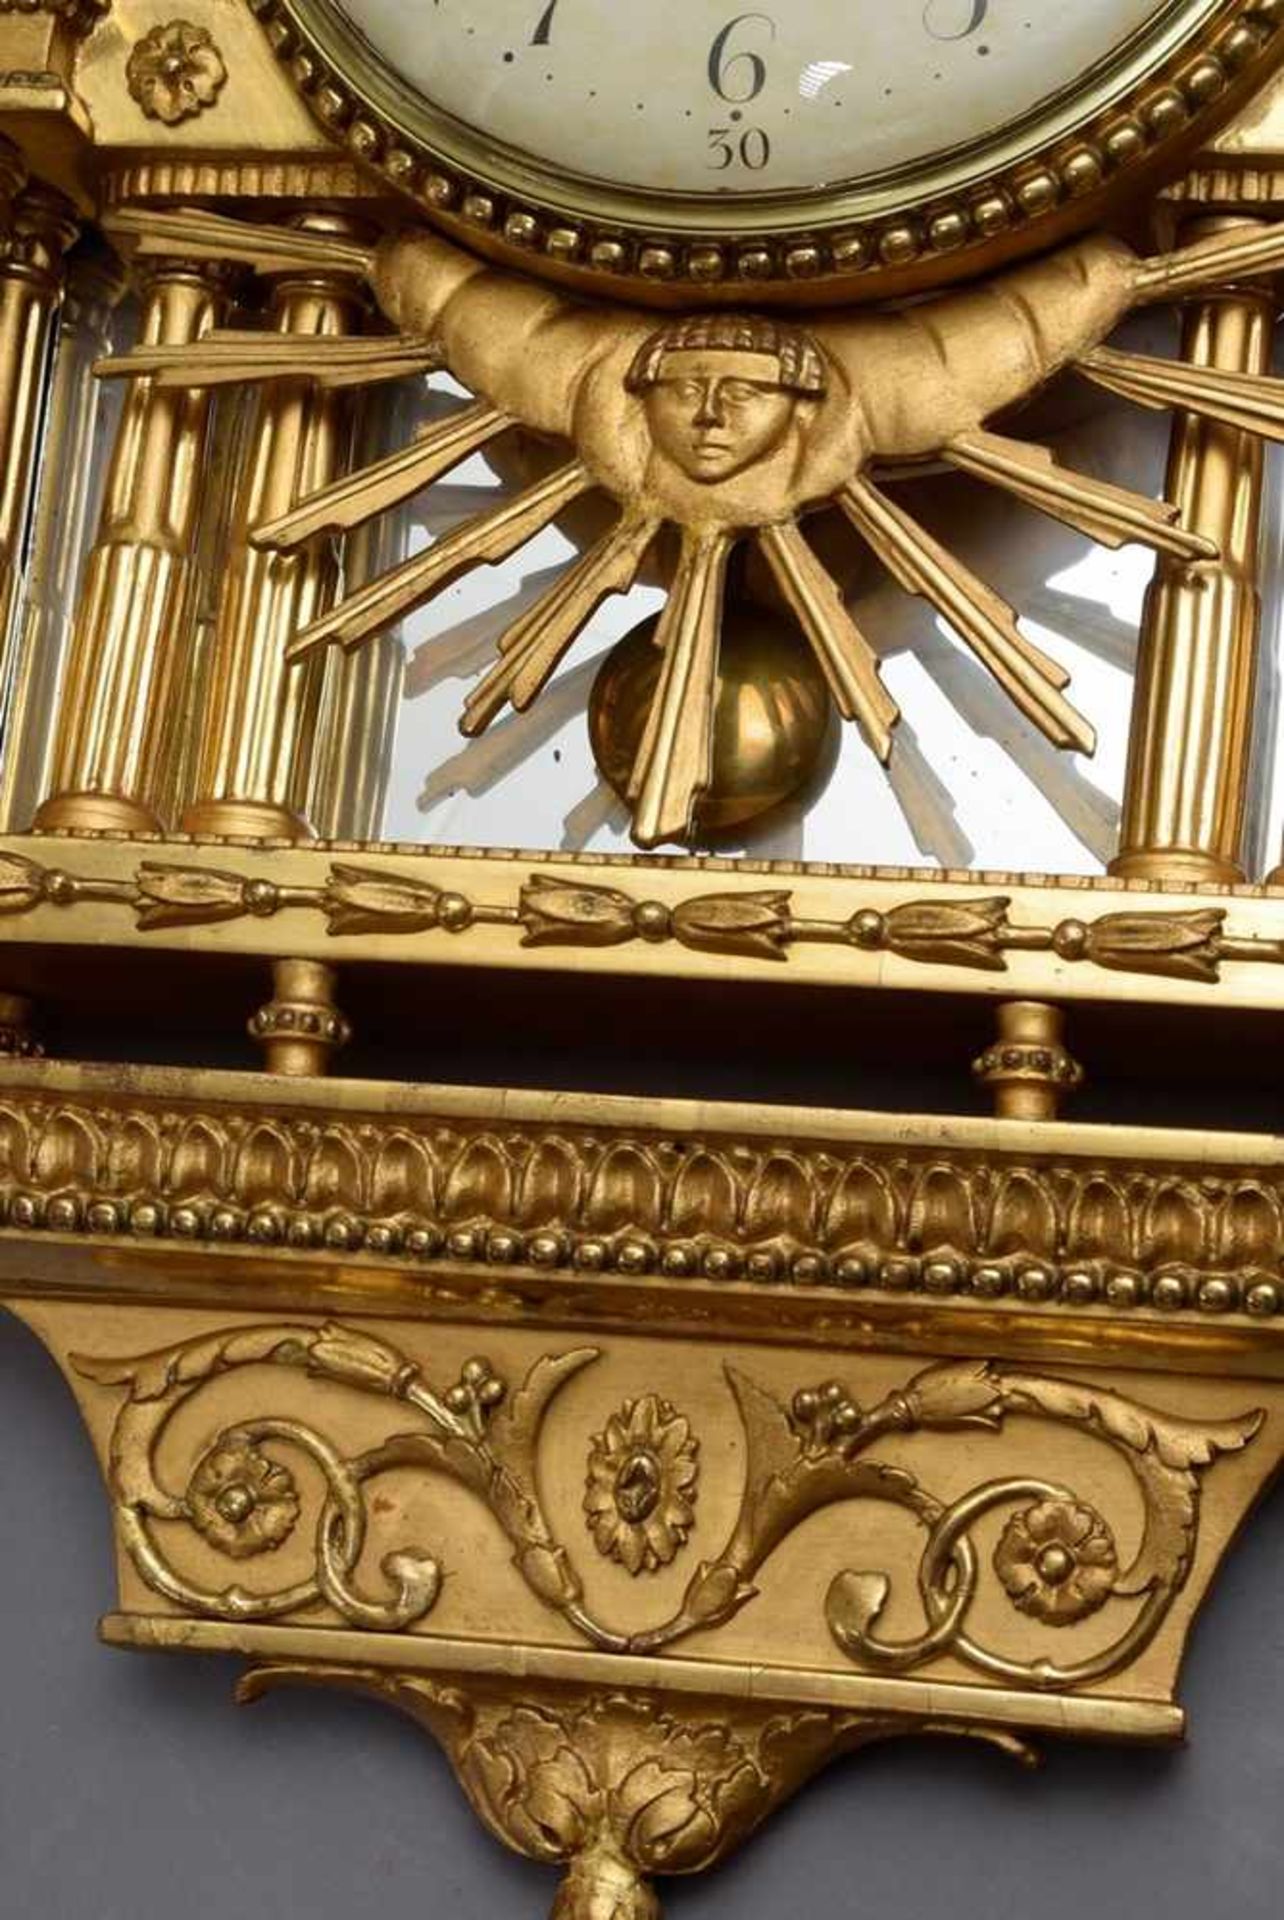 Swedish wall clock in gilded wood framing "Antique temple with sun symbol" and plastic loop - Image 3 of 5